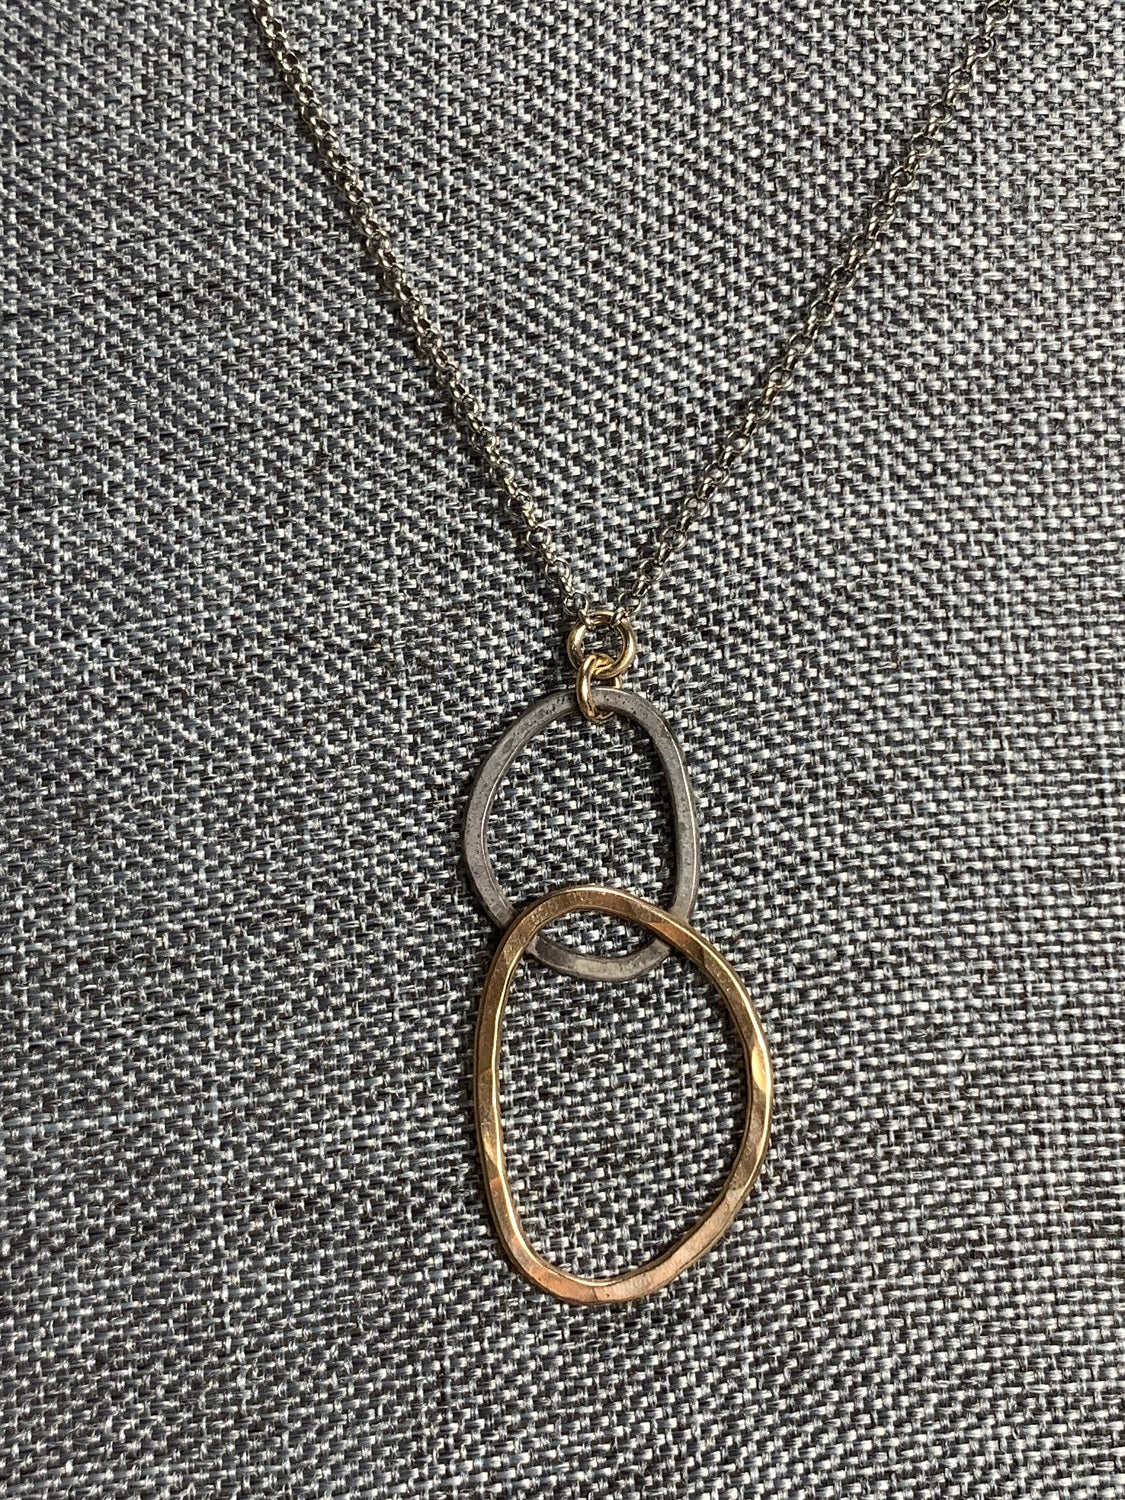 Oxidized Silver and 14K Gold Filled Necklace 18"